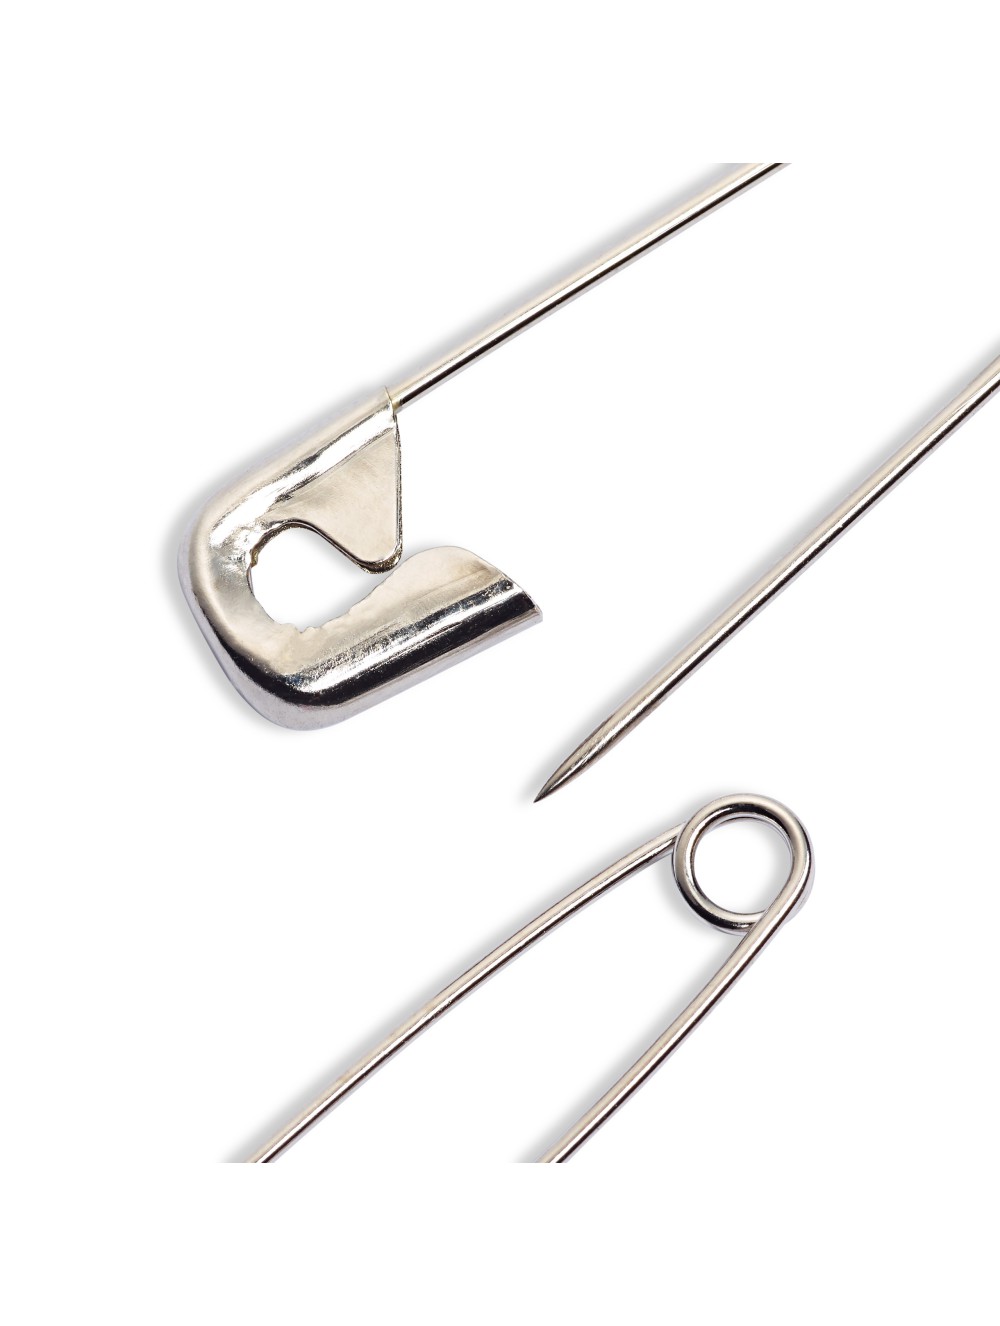 SILVER SAFETY PINS 85 mm (No 7) STEEL wholesale